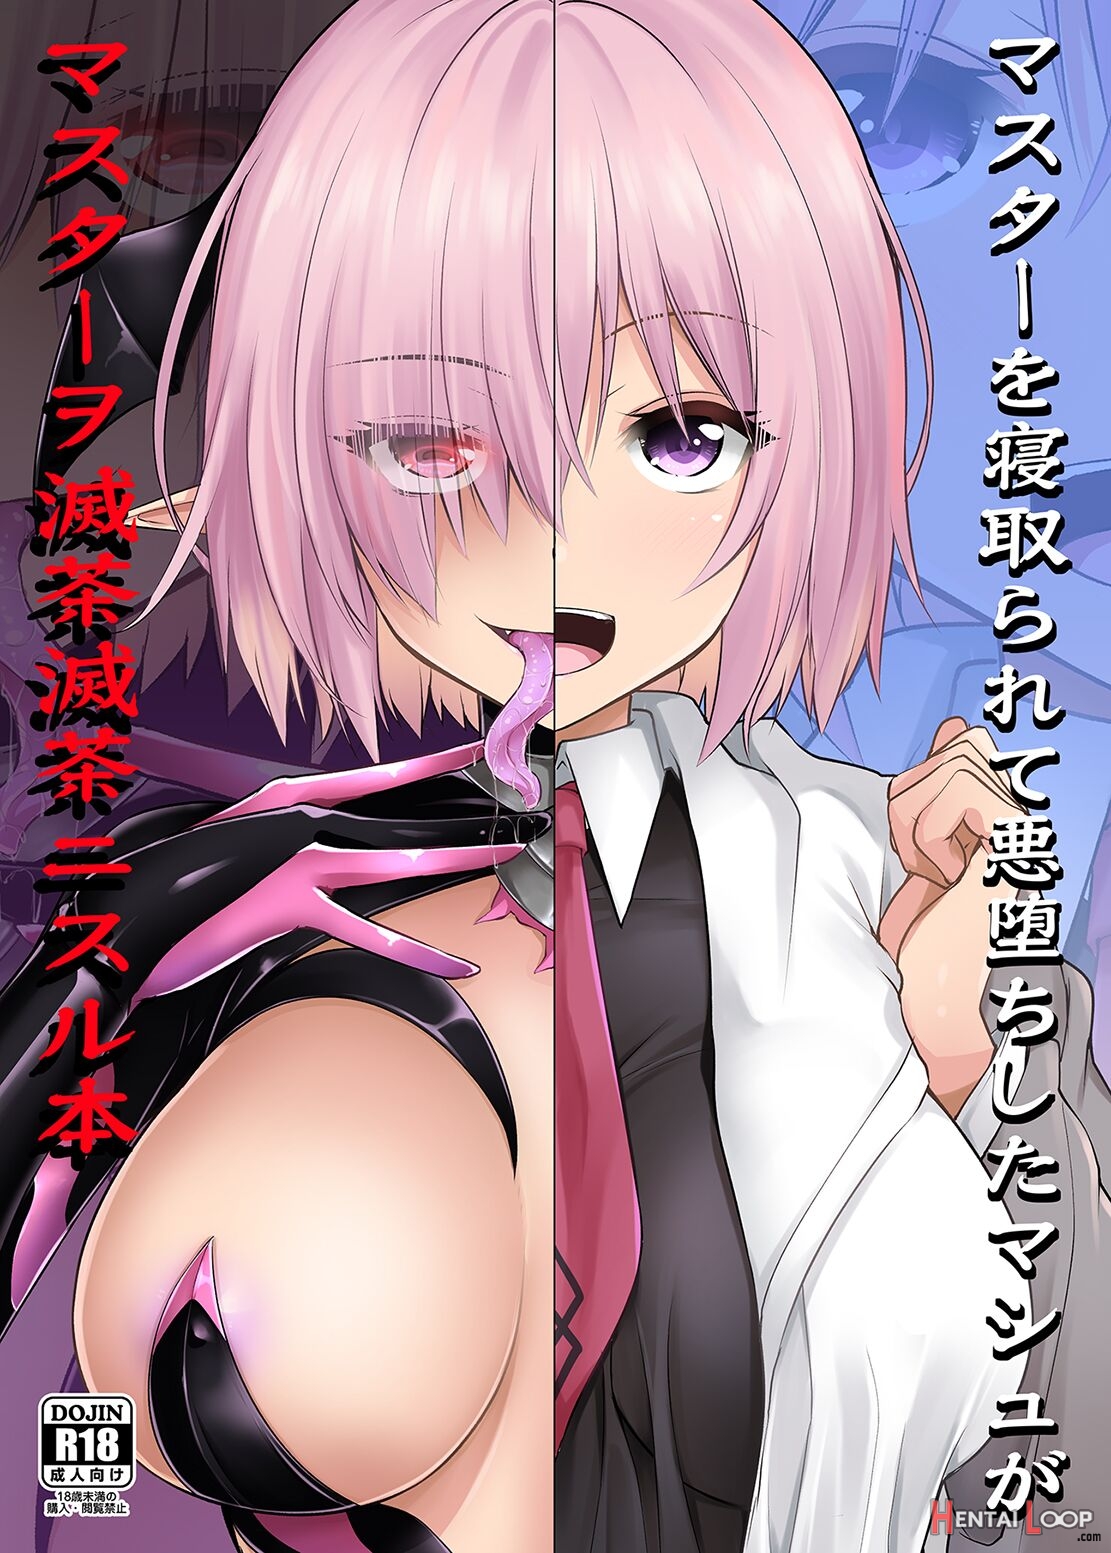 A Book About A Corrupted Mash Recklessly Making Love To Her Ntr'd Master page 1